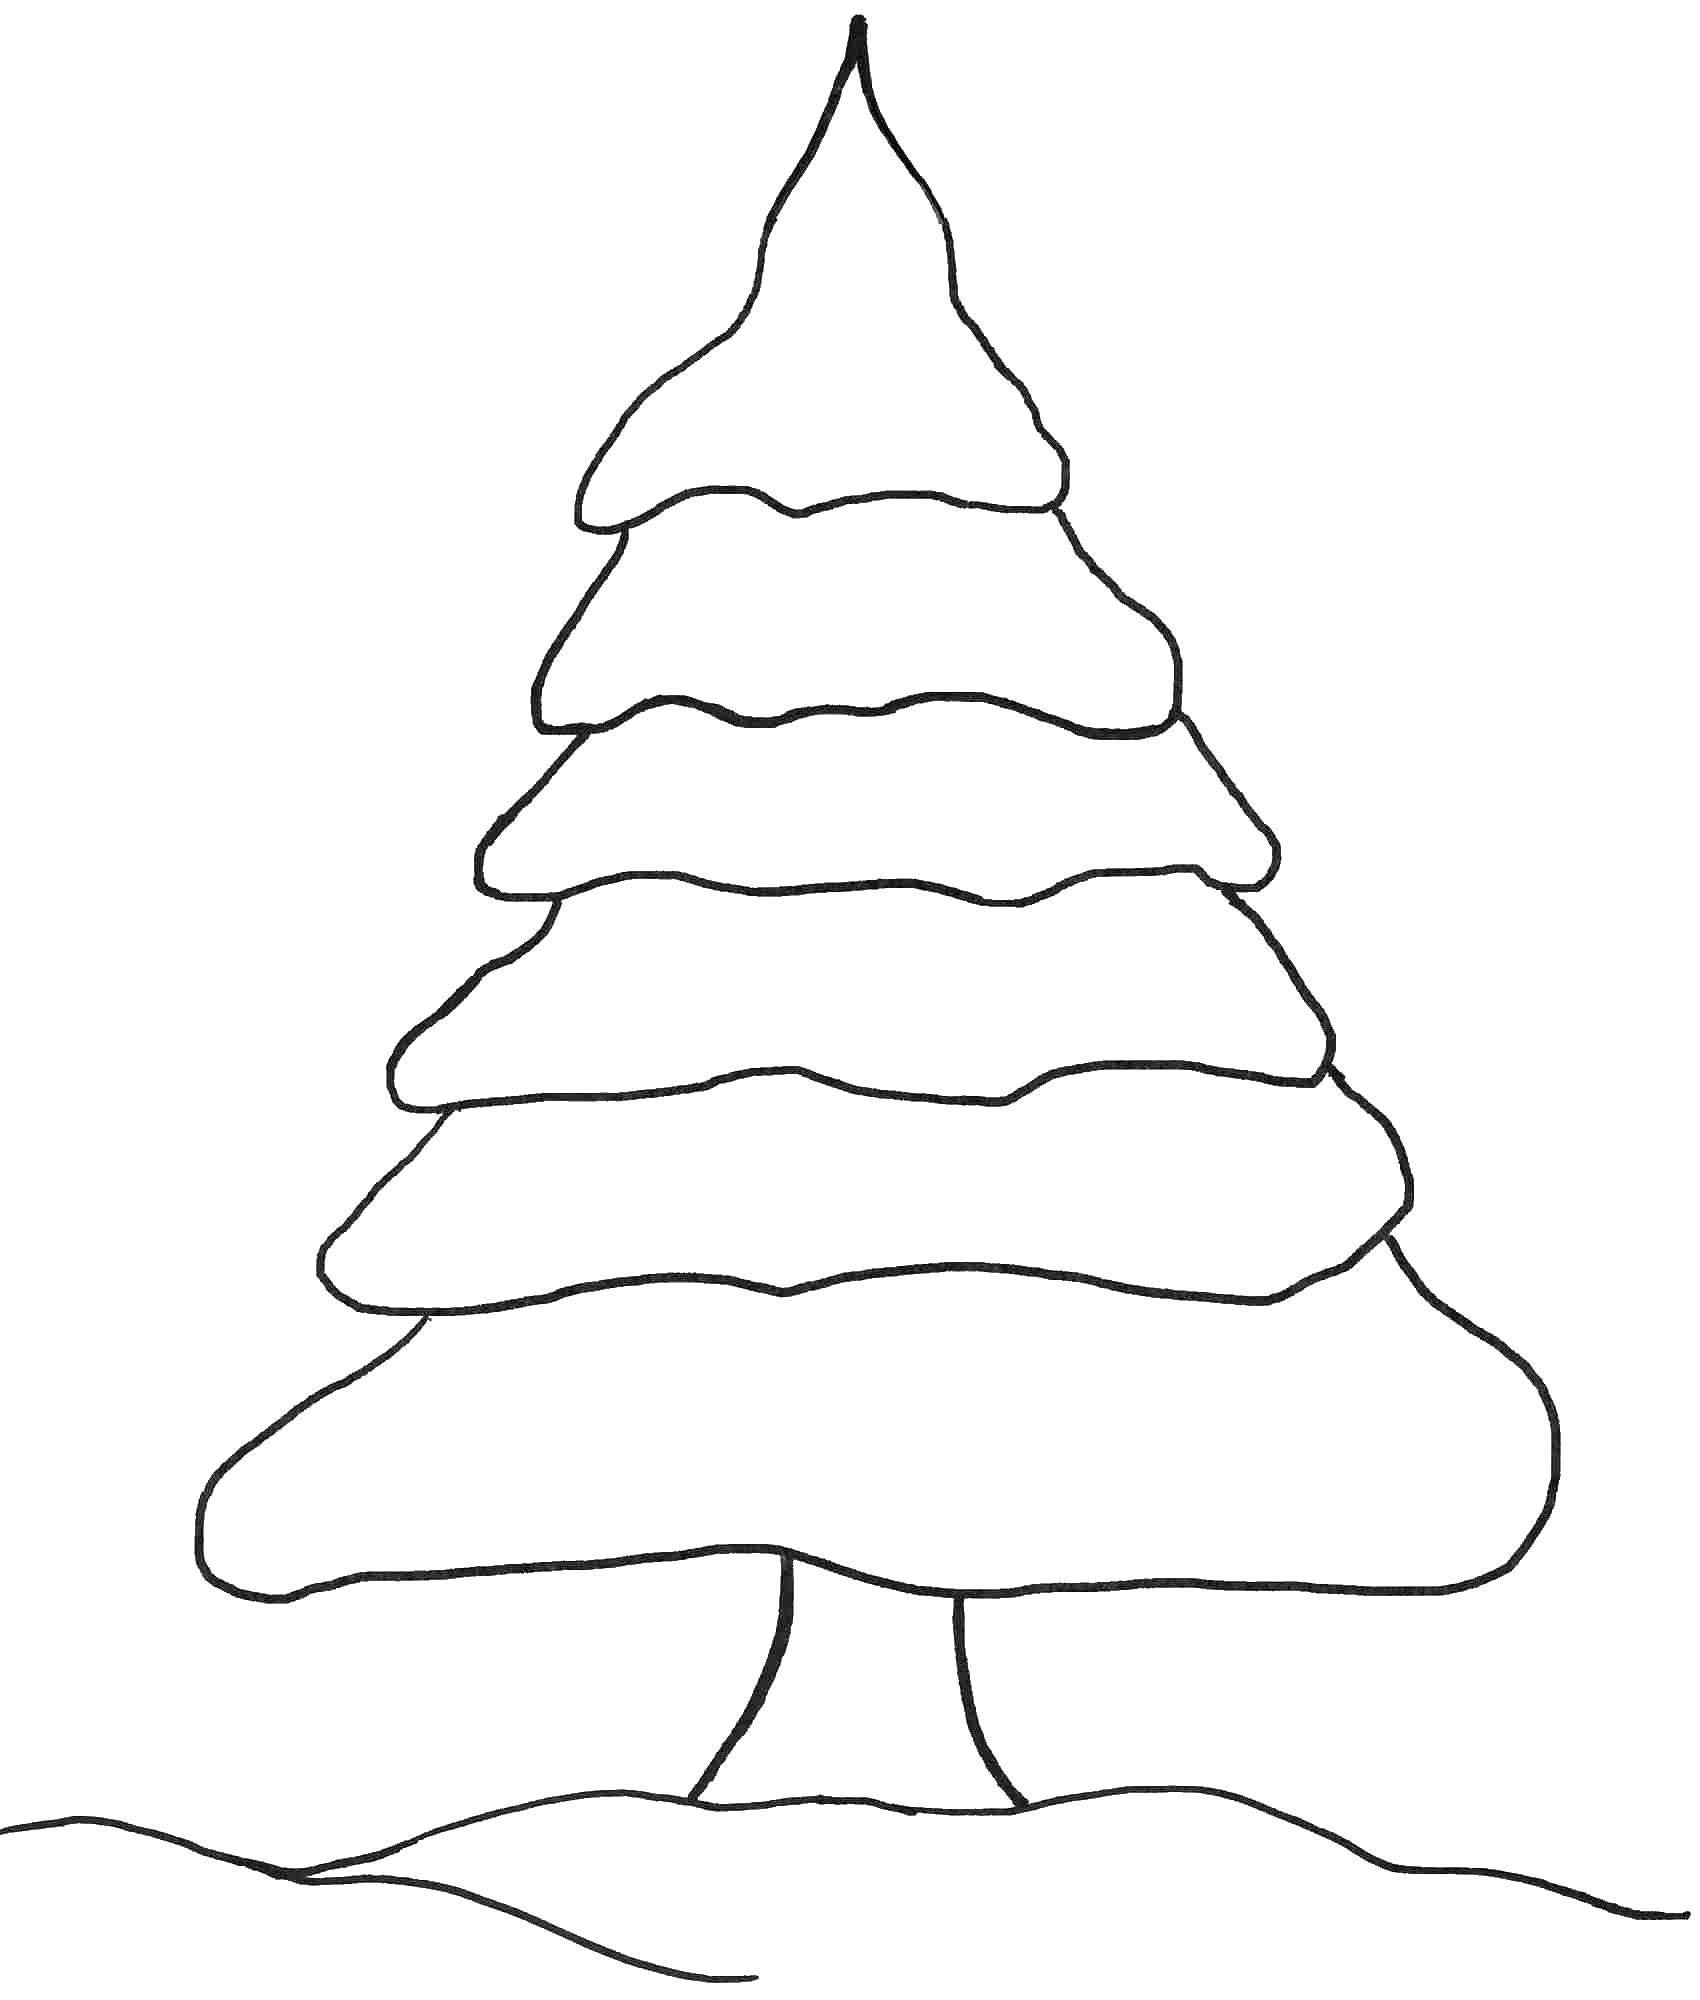 Coloring Tree. Category Christmas. Tags:  tree.